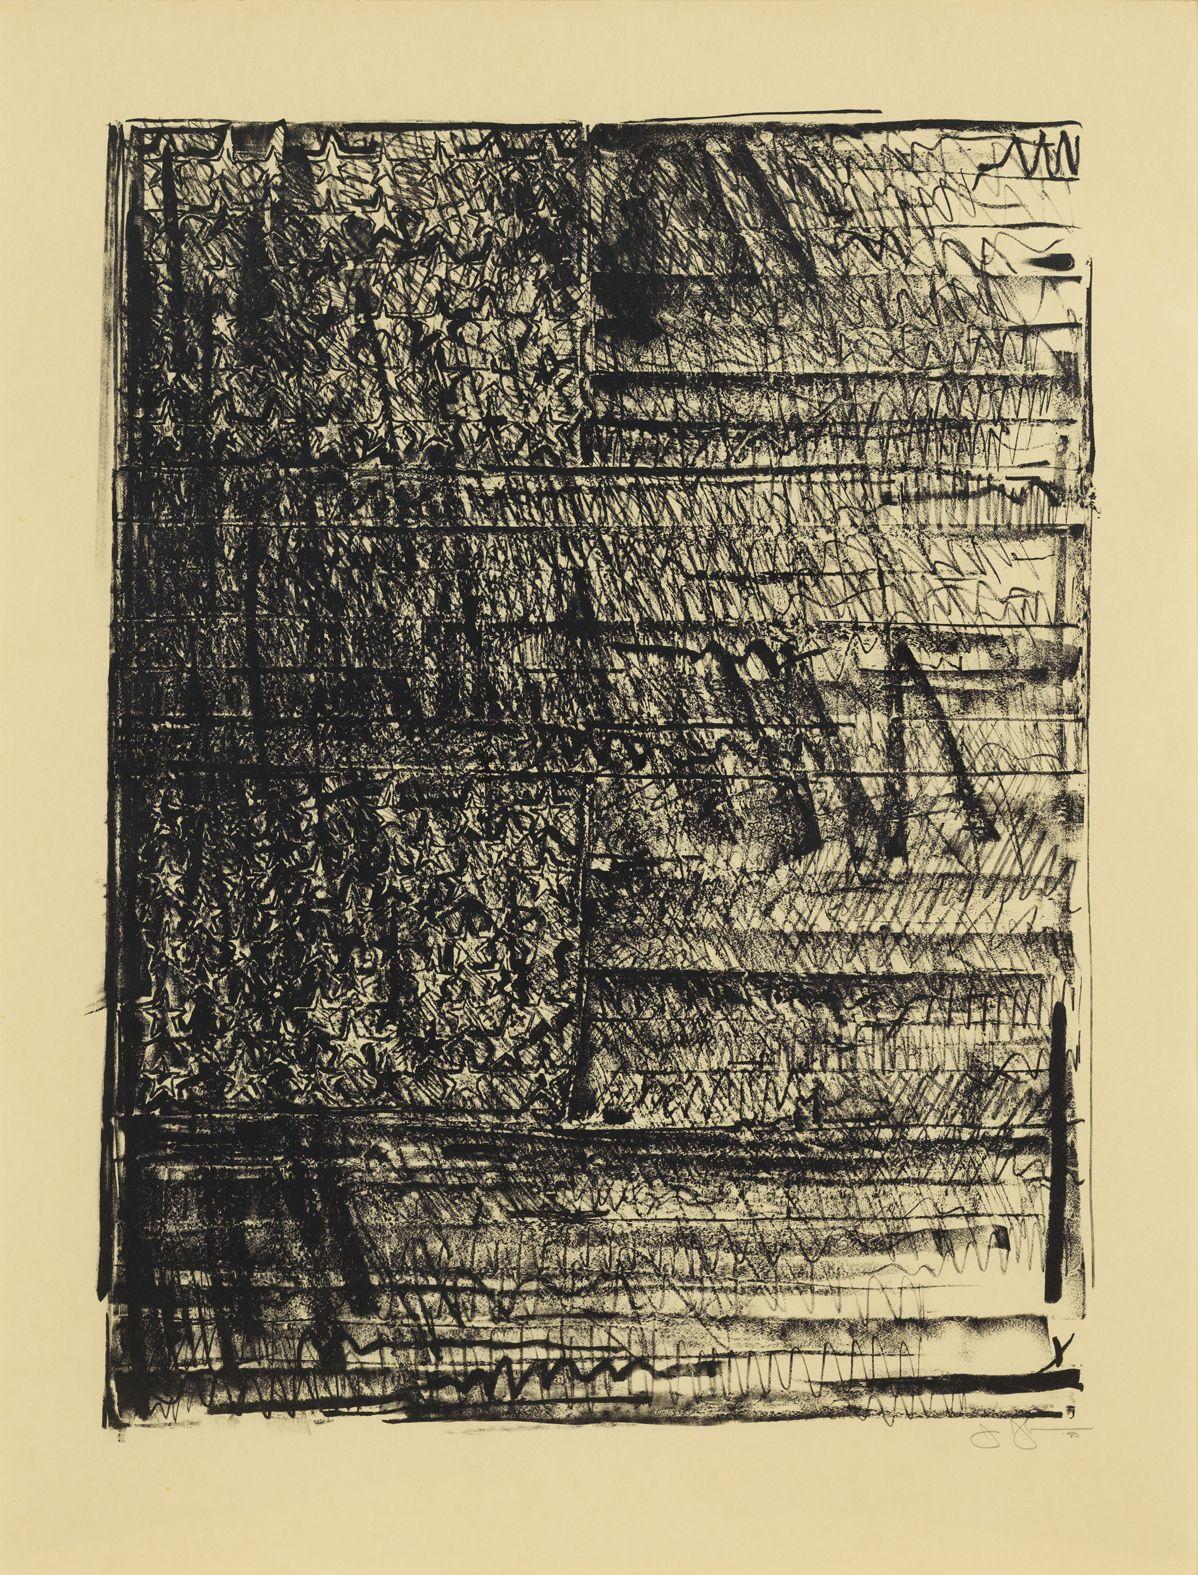 Two Flags - Print by Jasper Johns